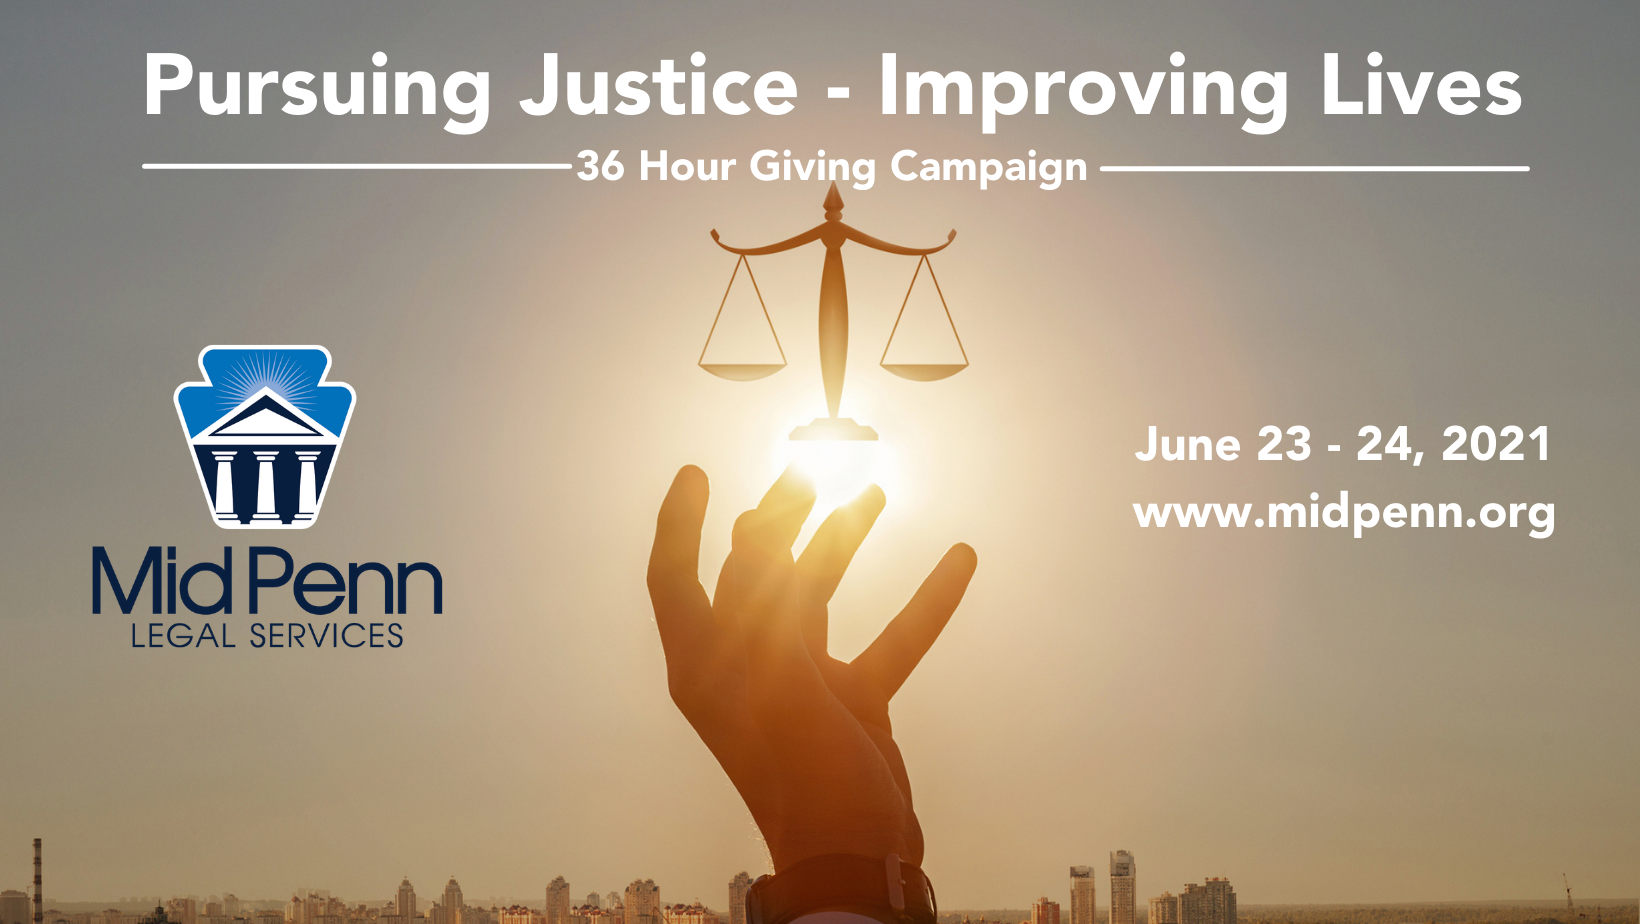 Pursing Justice - Improving Live MidPenn Legal Services Fundraiser